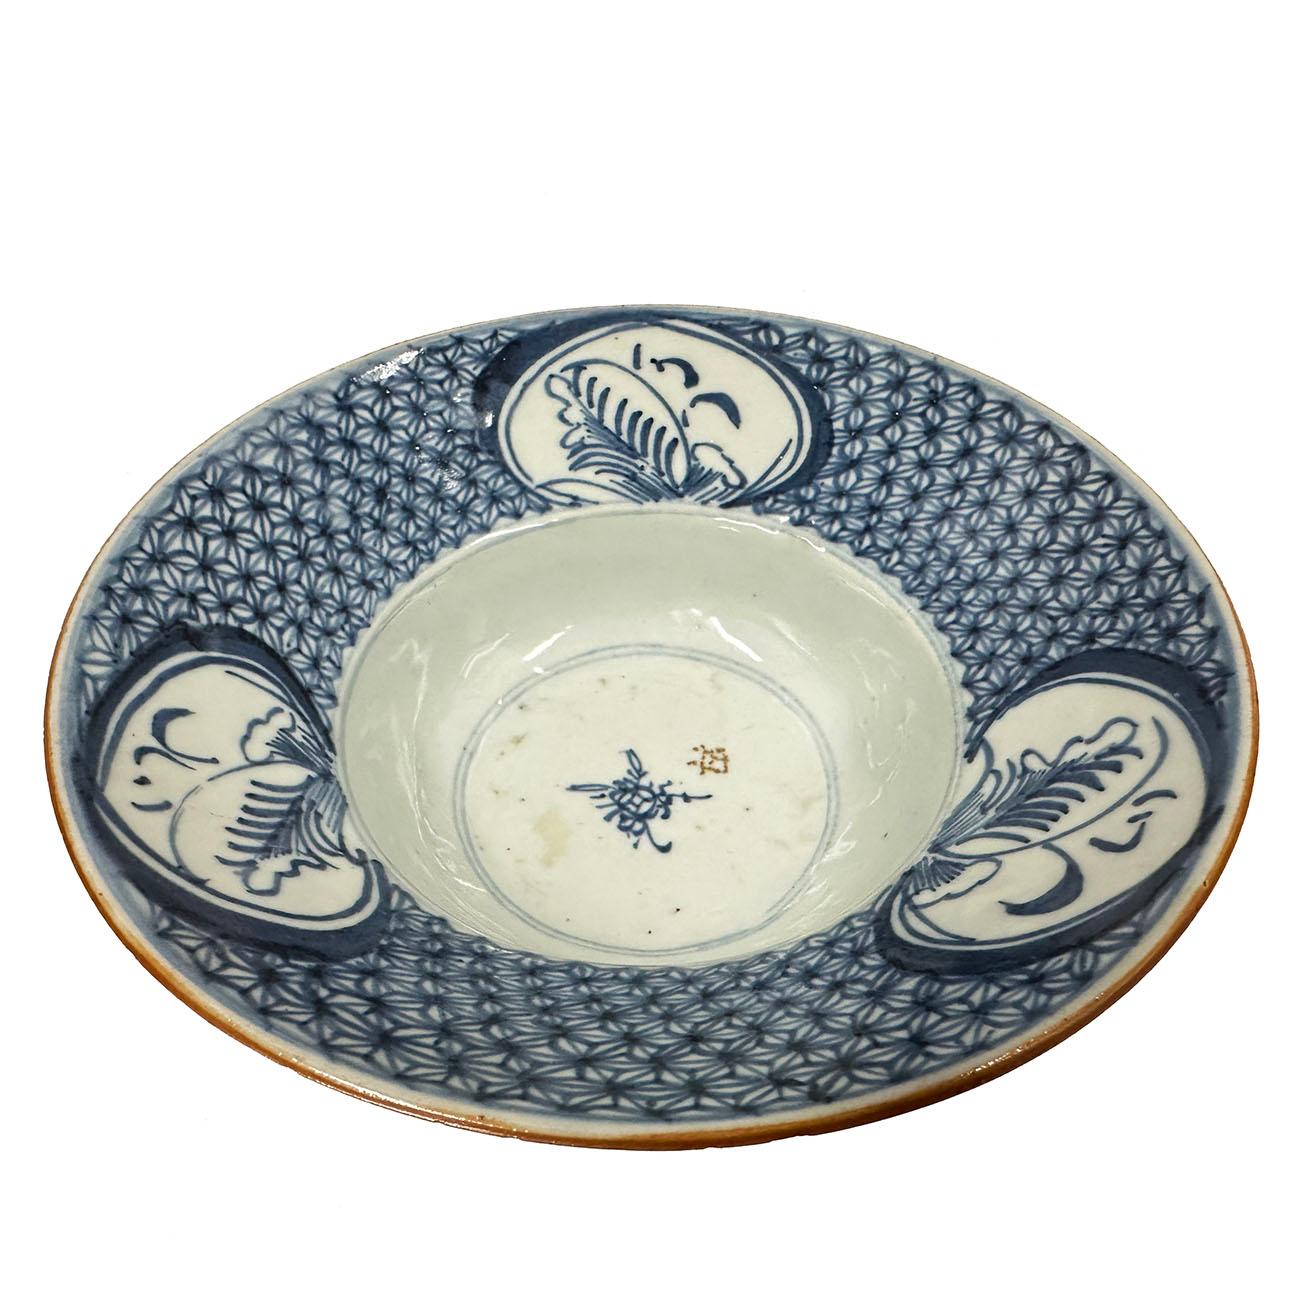 

This antique Chinese porcelain bowl is a rare find from the Qing Dynasty, featuring delicate blue and white patterns. Crafted from high-quality porcelain and pottery, this bowl is an authentic antique original from the 1800s. Its intricate design